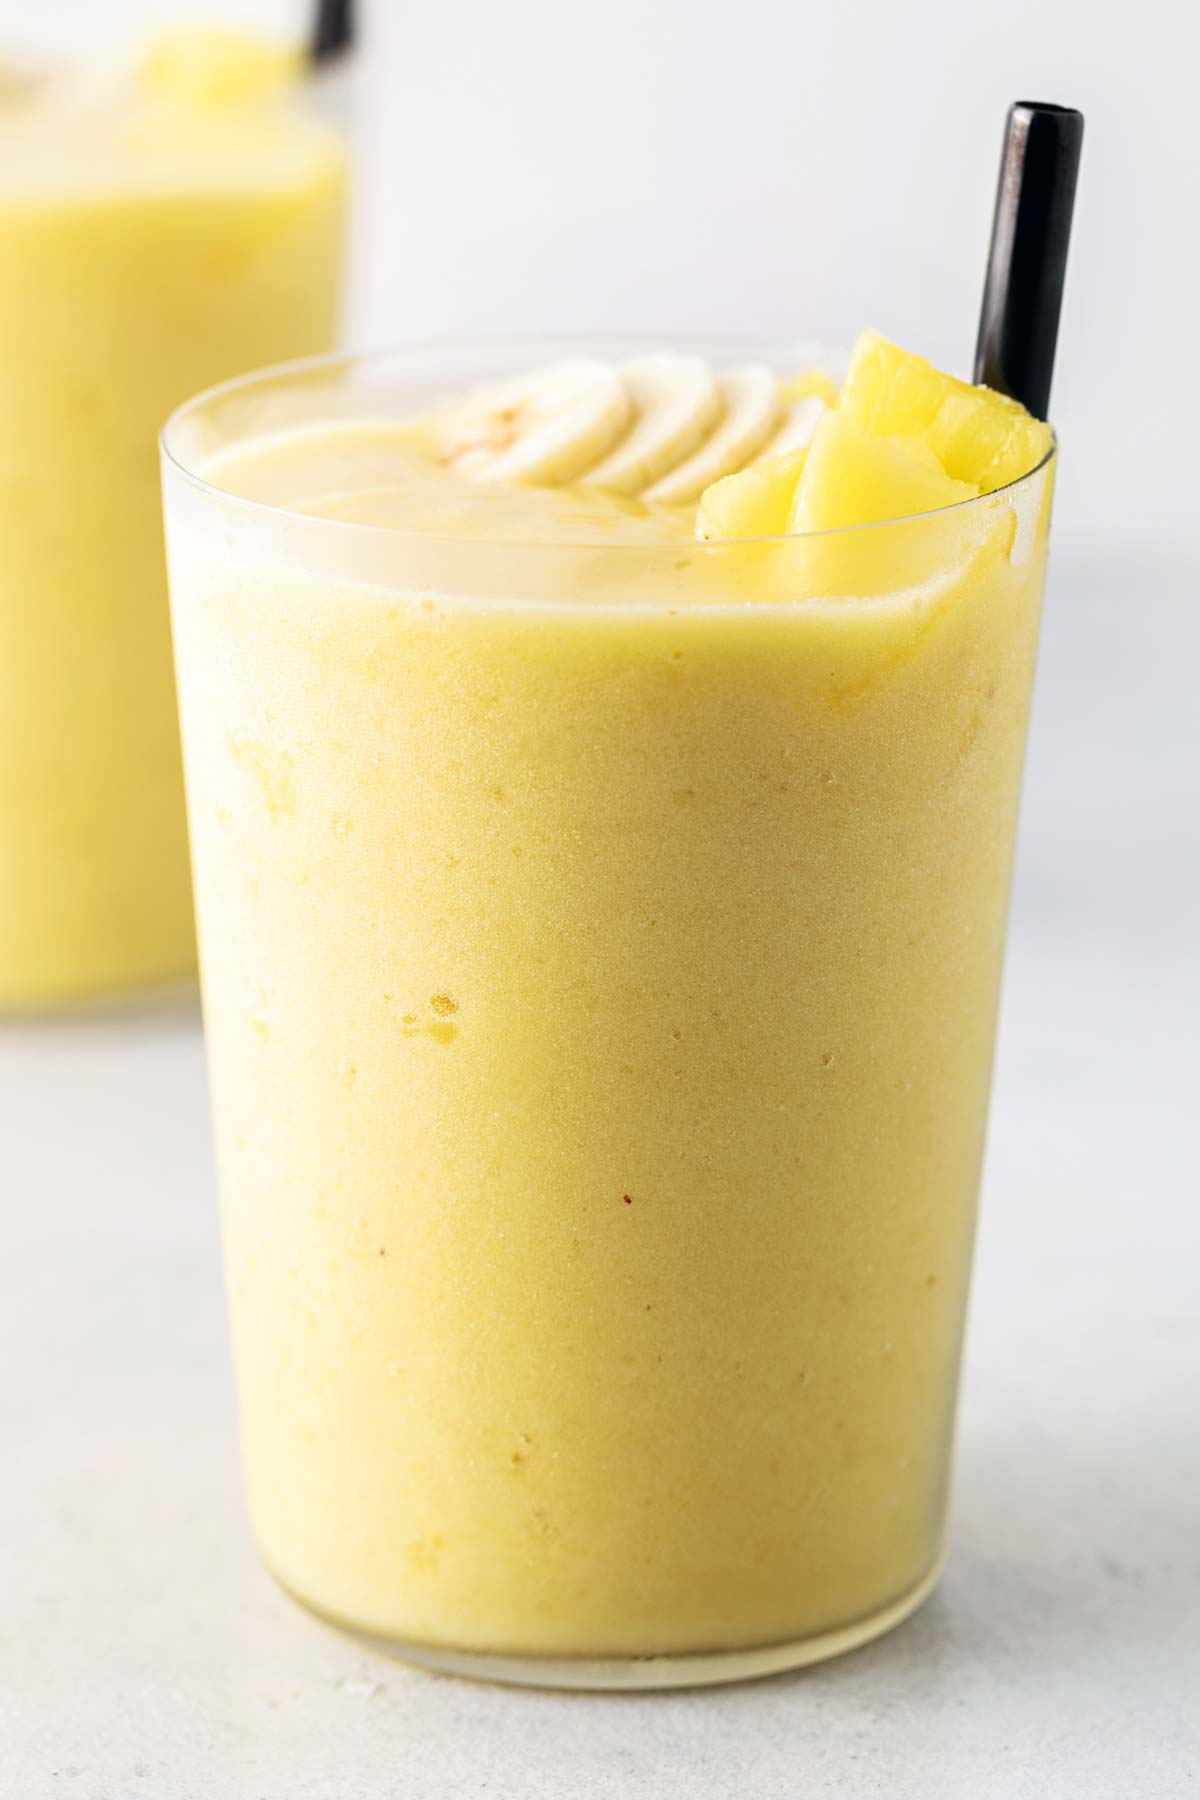 Pineapple smoothie in a tall glass with black straw.